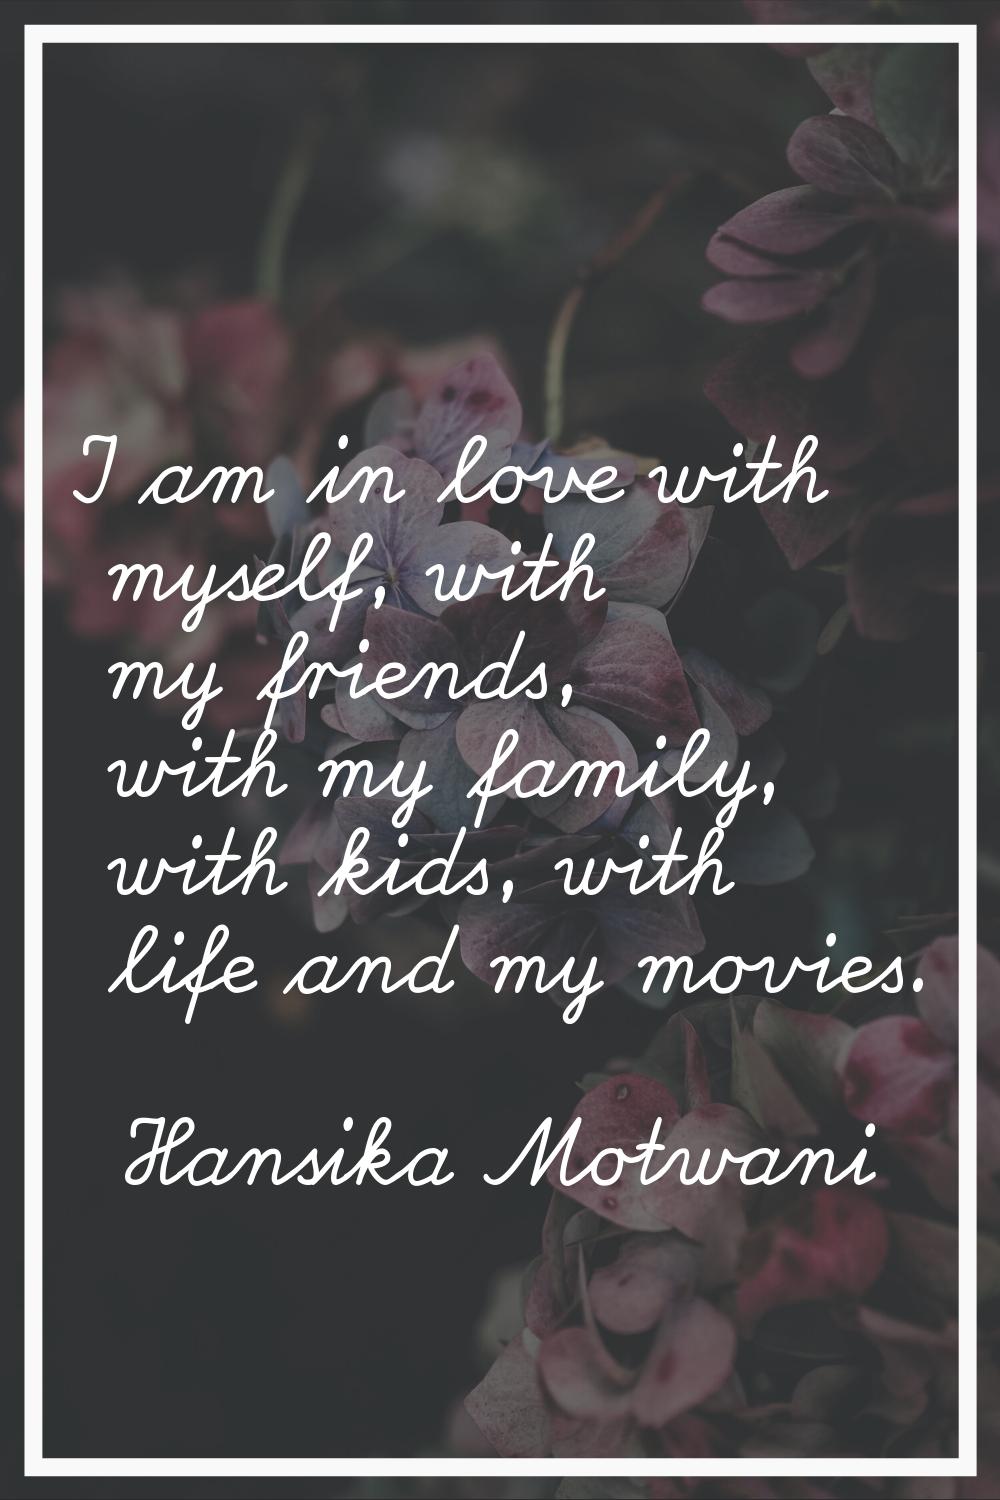 I am in love with myself, with my friends, with my family, with kids, with life and my movies.